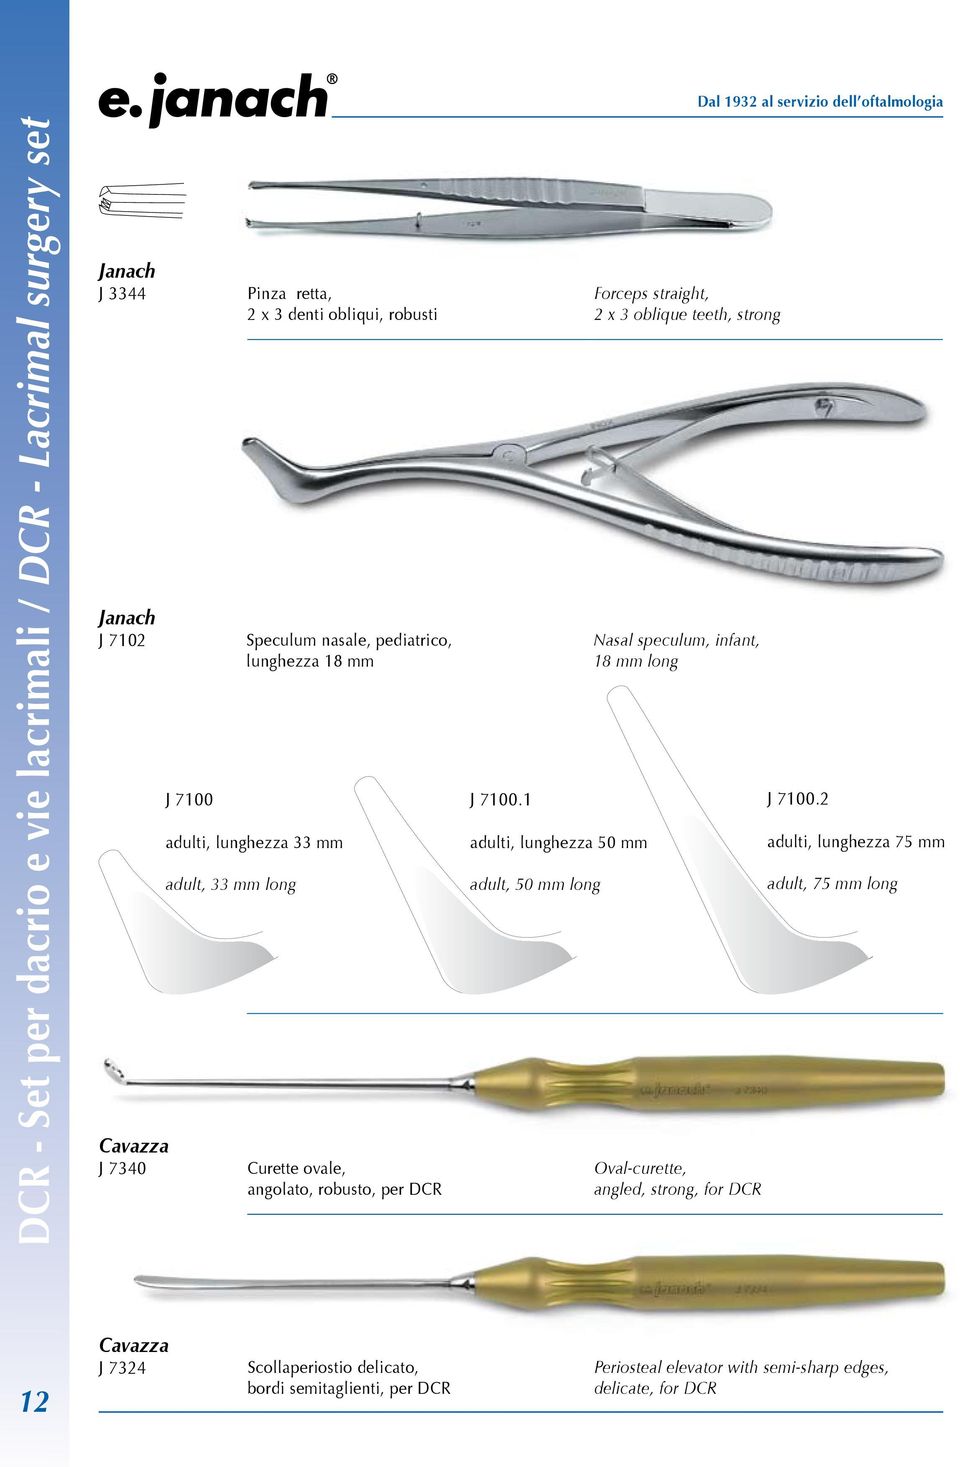 1 adulti, lunghezza 50 mm adult, 50 mm long Forceps straight, 2 x 3 oblique teeth, strong Nasal speculum, infant, 18 mm long Oval-curette, angled, strong, for DCR J